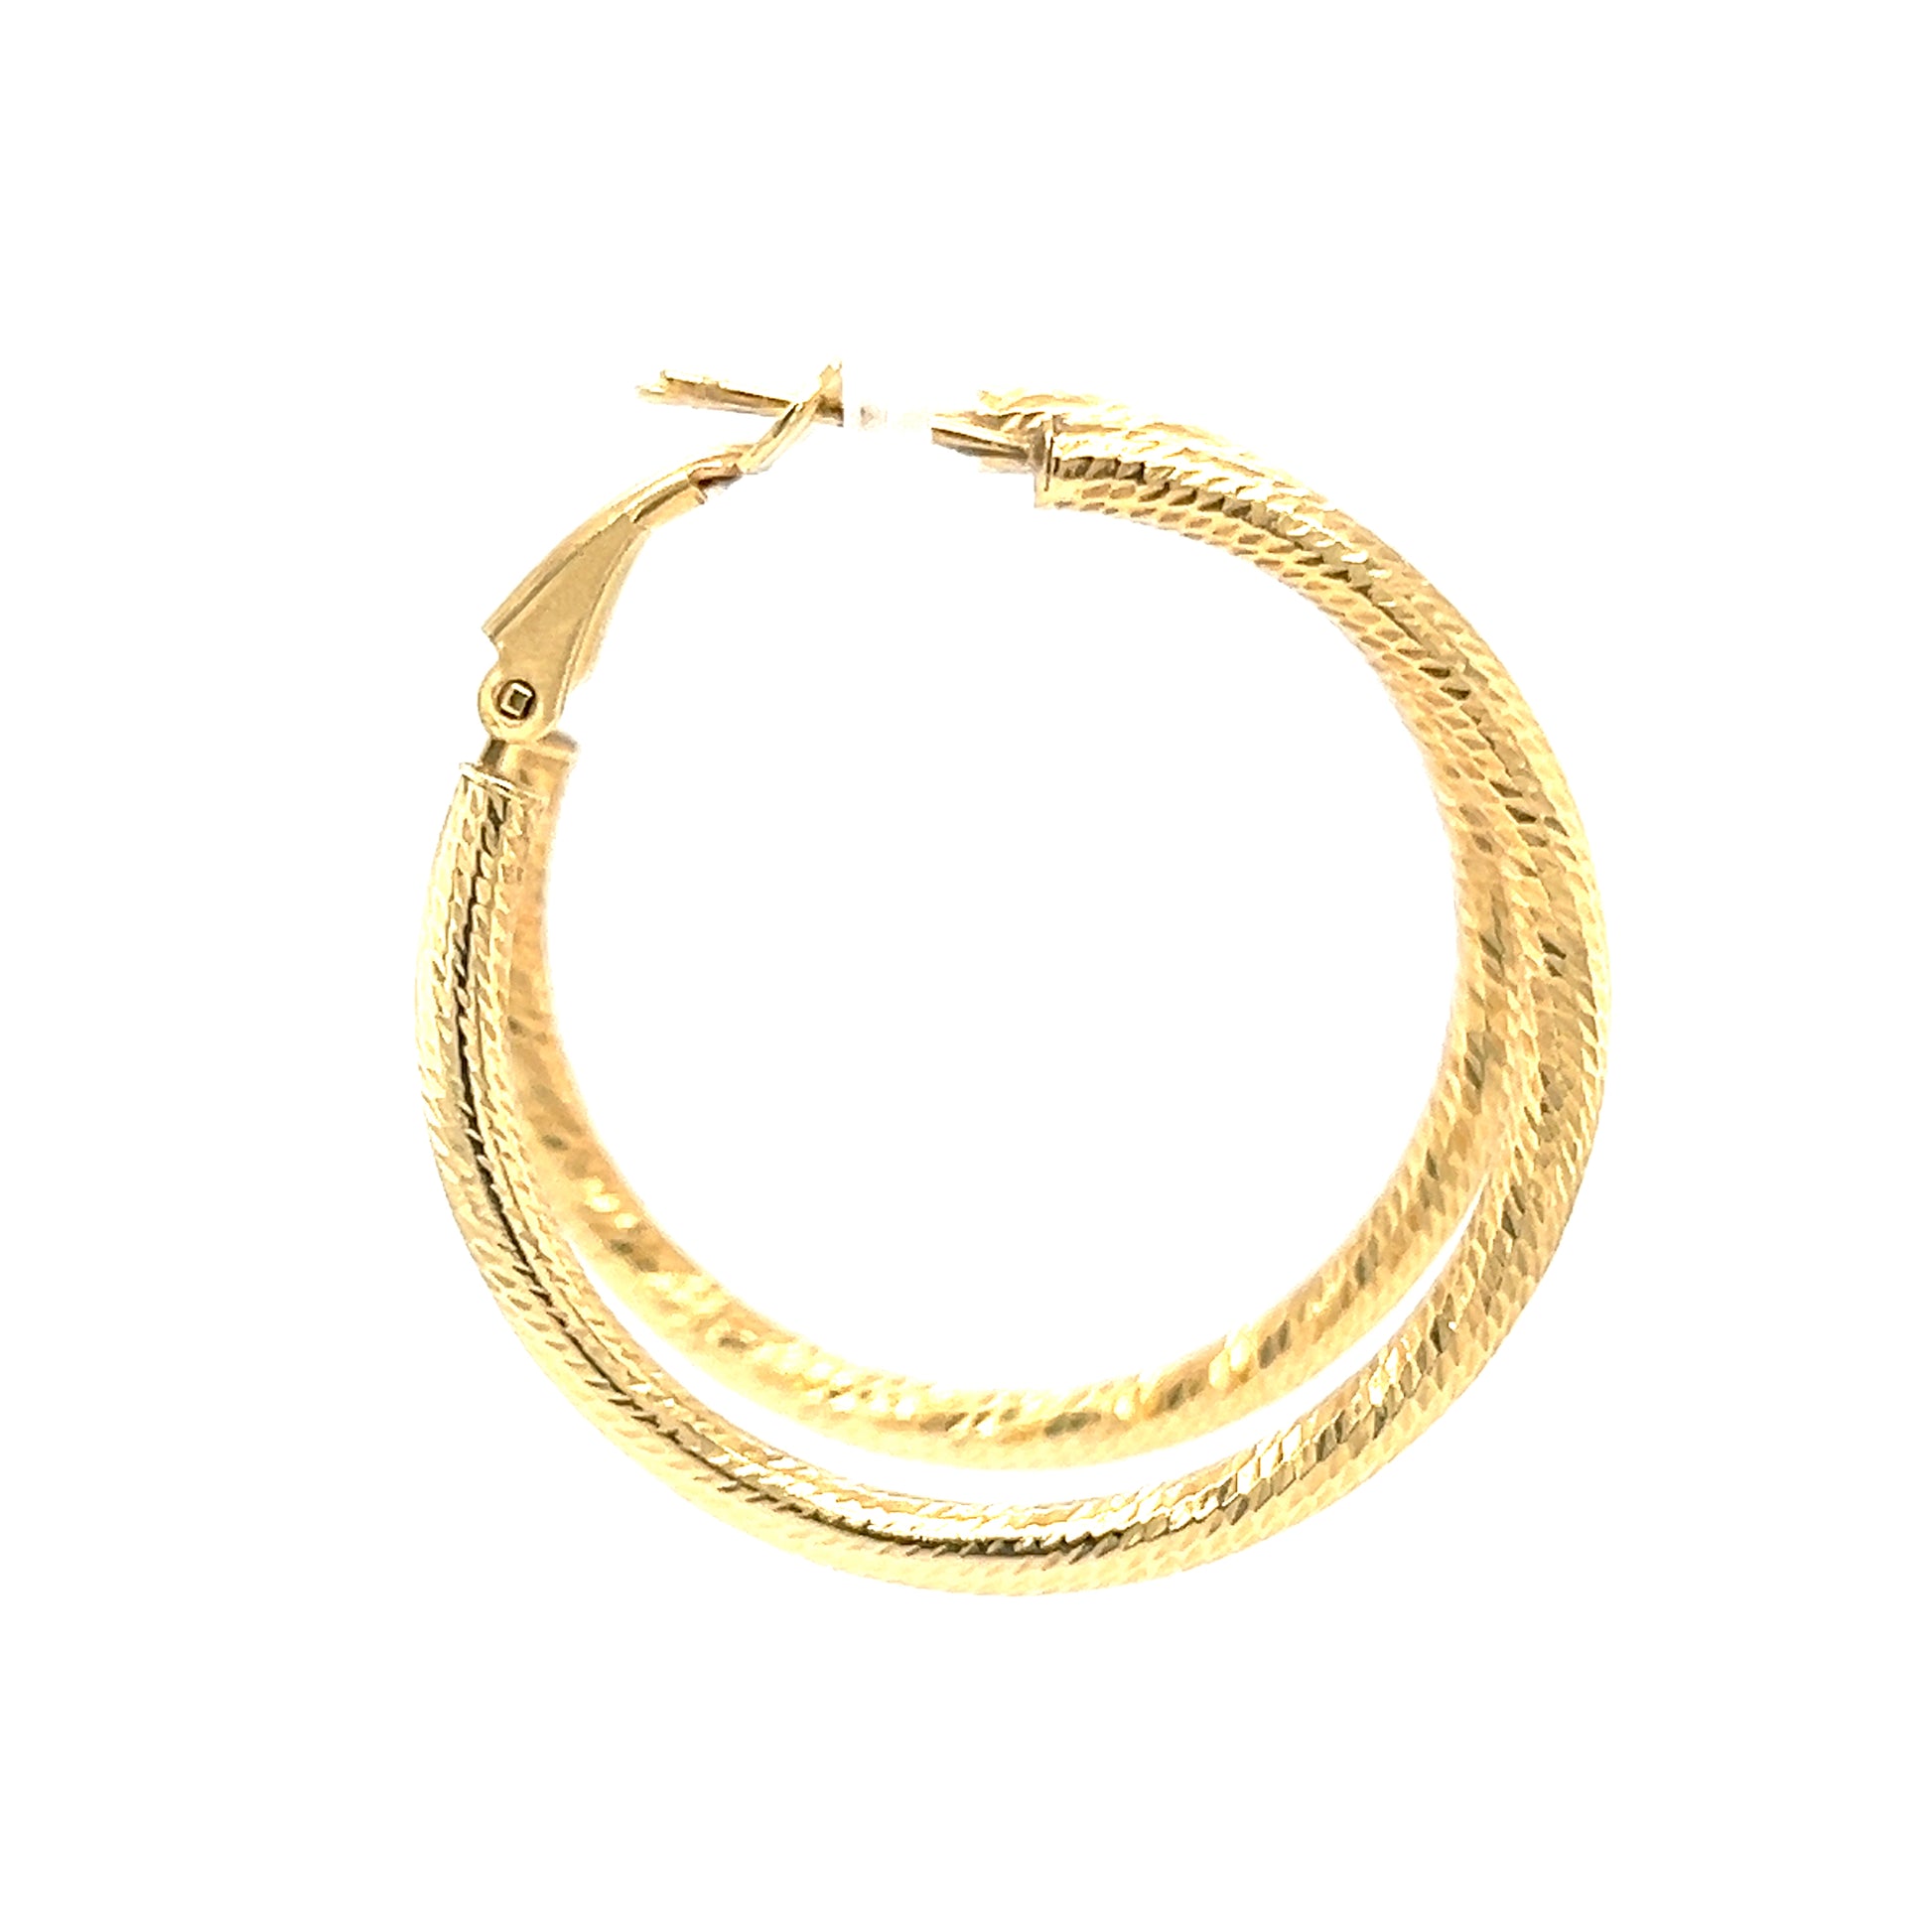 Round Hoop 30mm Earrings with Diamond-cut Finish in 10K Yellow Gold Side View